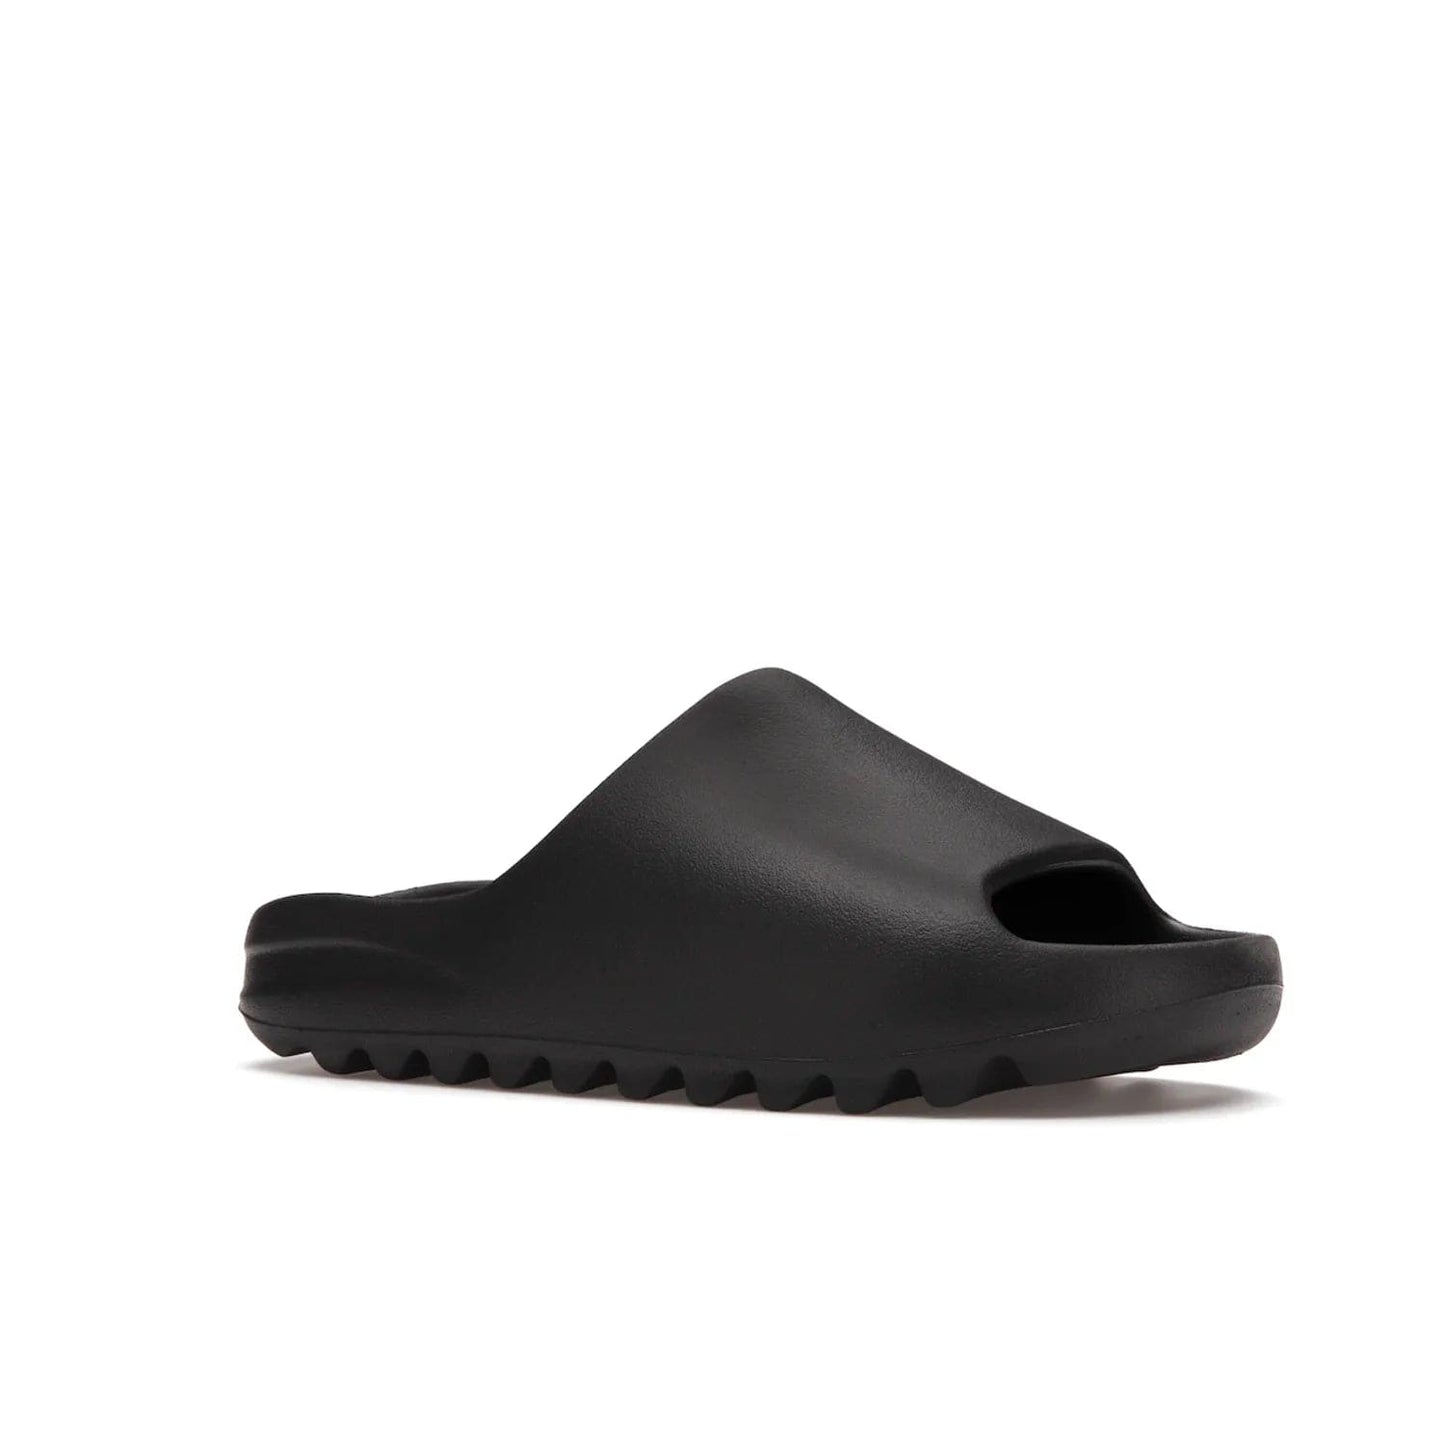 adidas Yeezy Slide Onyx - Image 4 - Only at www.BallersClubKickz.com - Step into comfort and style with the adidas Yeezy Slide Onyx. Featuring foam construction, an all-black colorway and a grooved outsole for stability and responsiveness, this versatile slide is a must-have for your collection.